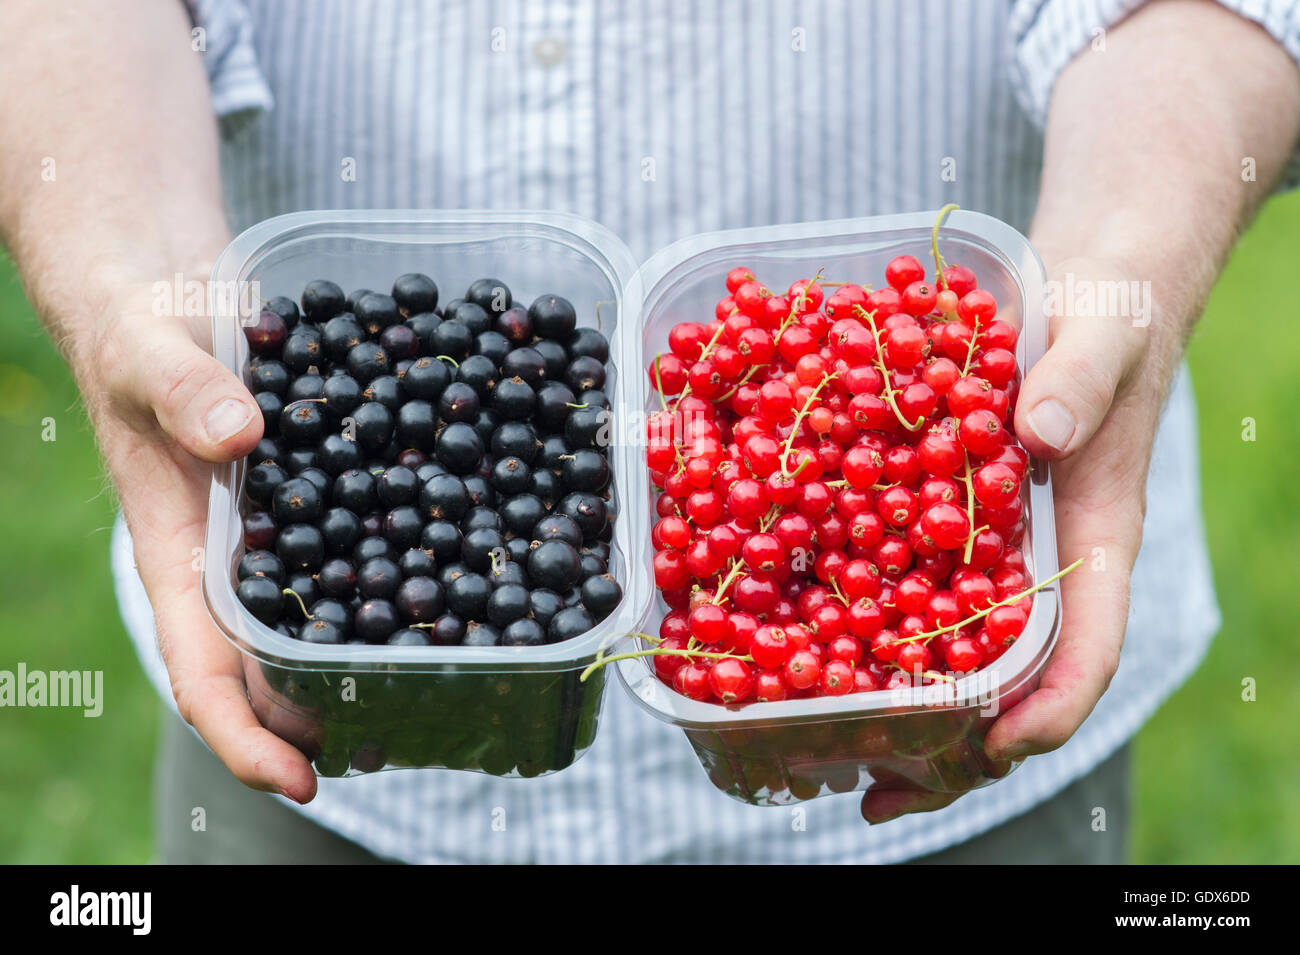 Ribes rubrum and Ribes nigrum. Man holding punnets of Redcurrants and Blackcurrants Stock Photo